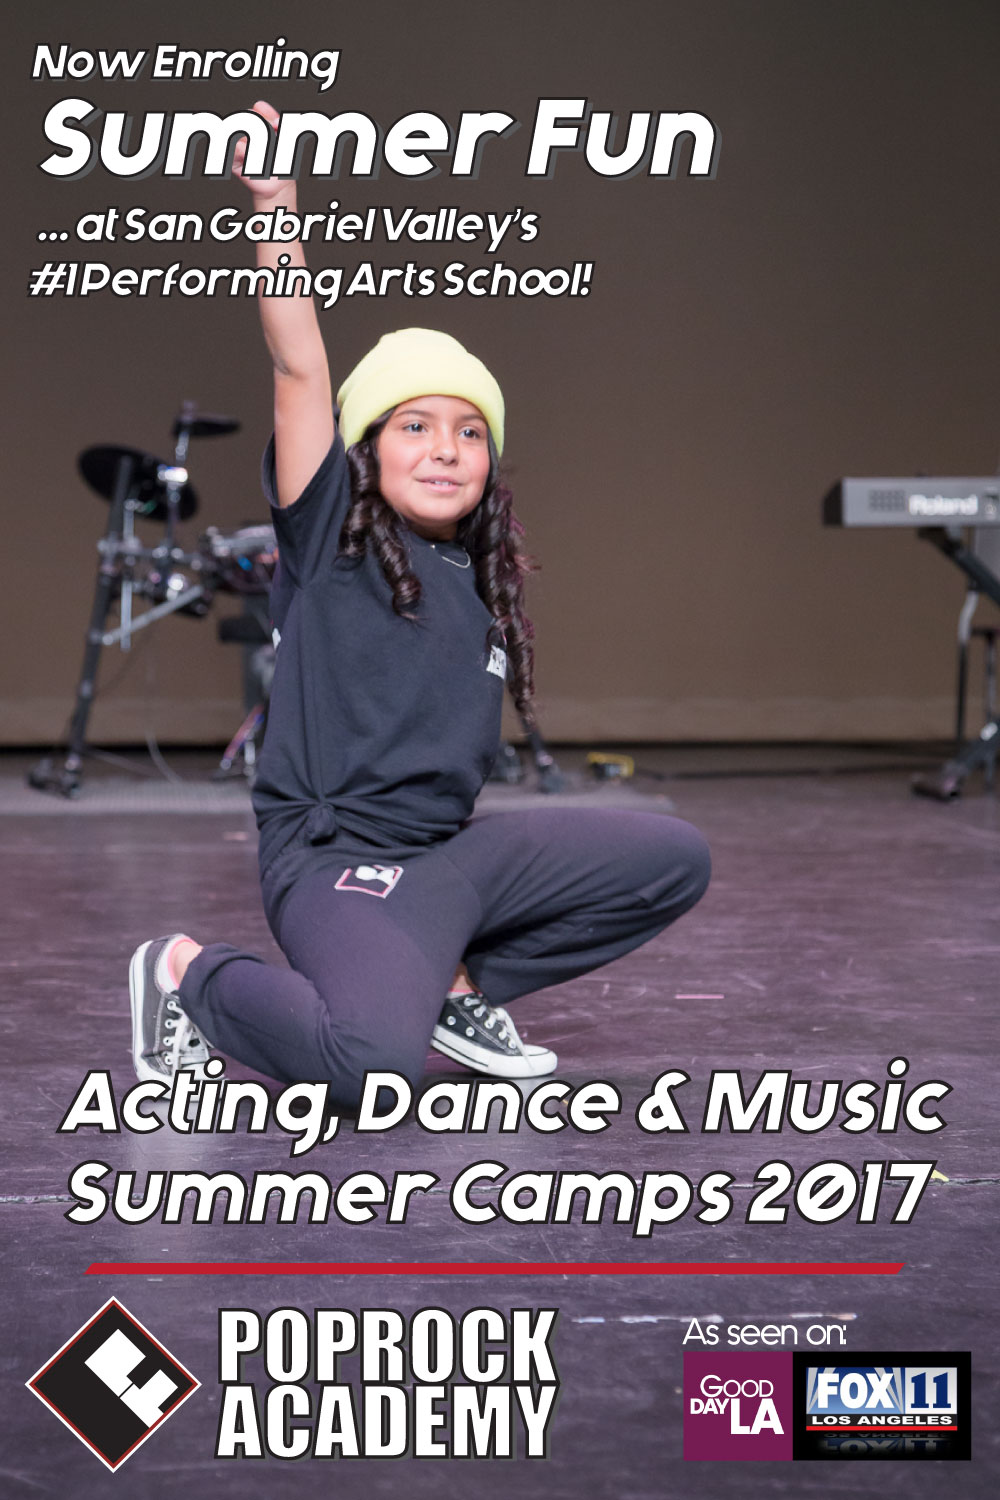 Music, Dance and acting Summer Camp in Alhambra